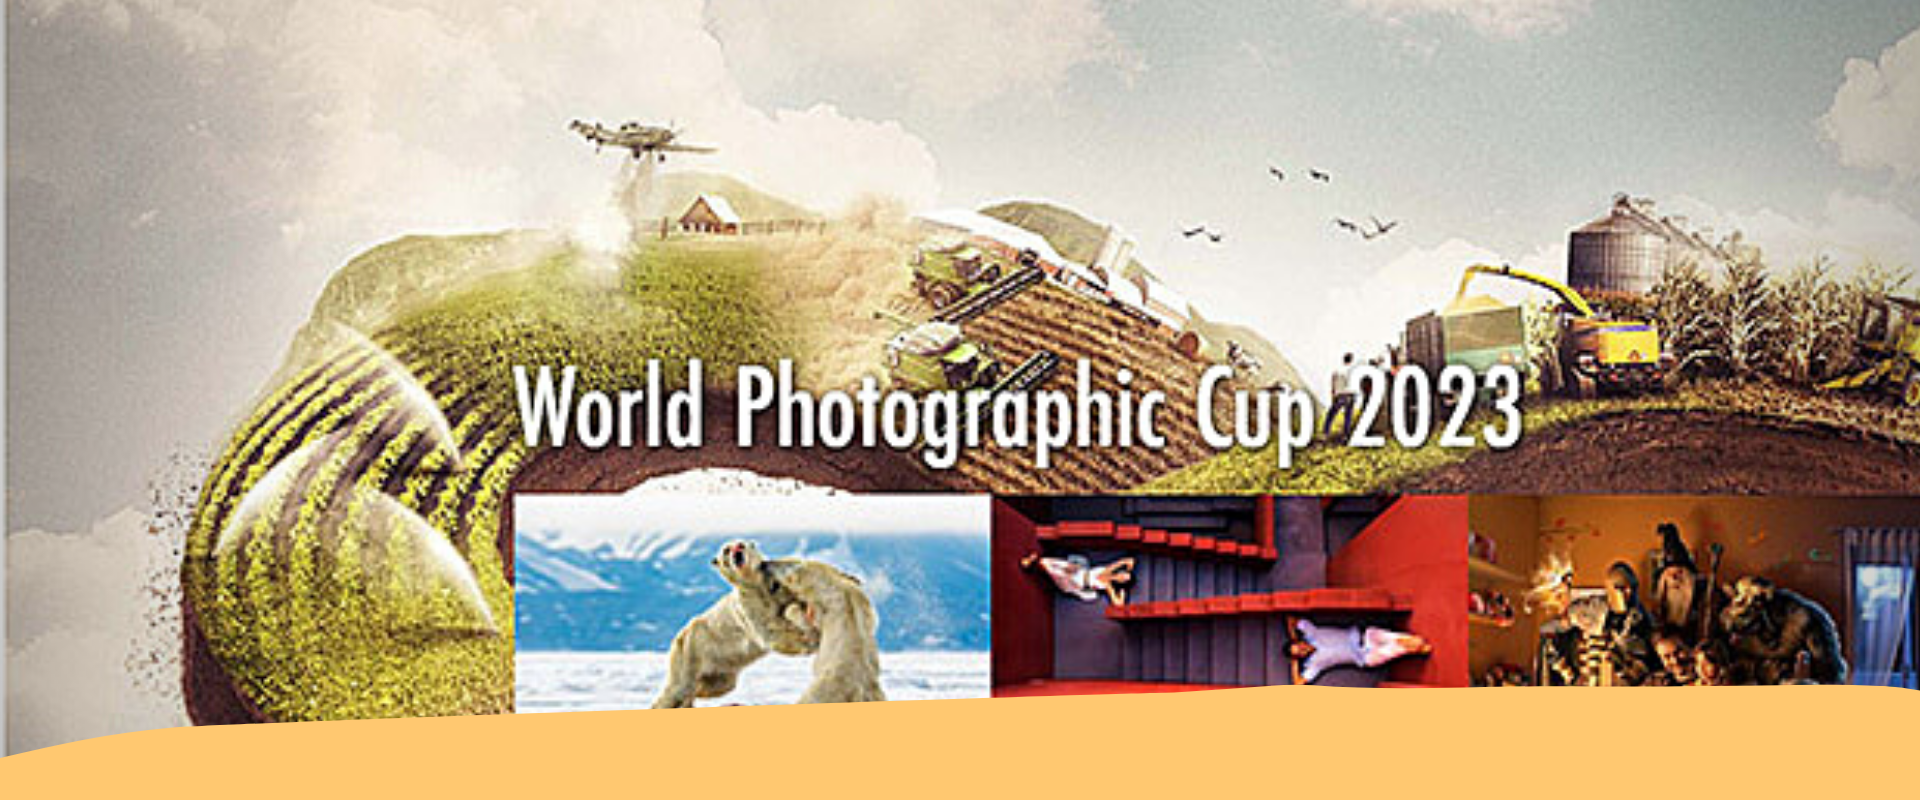 World photographic cup 2023